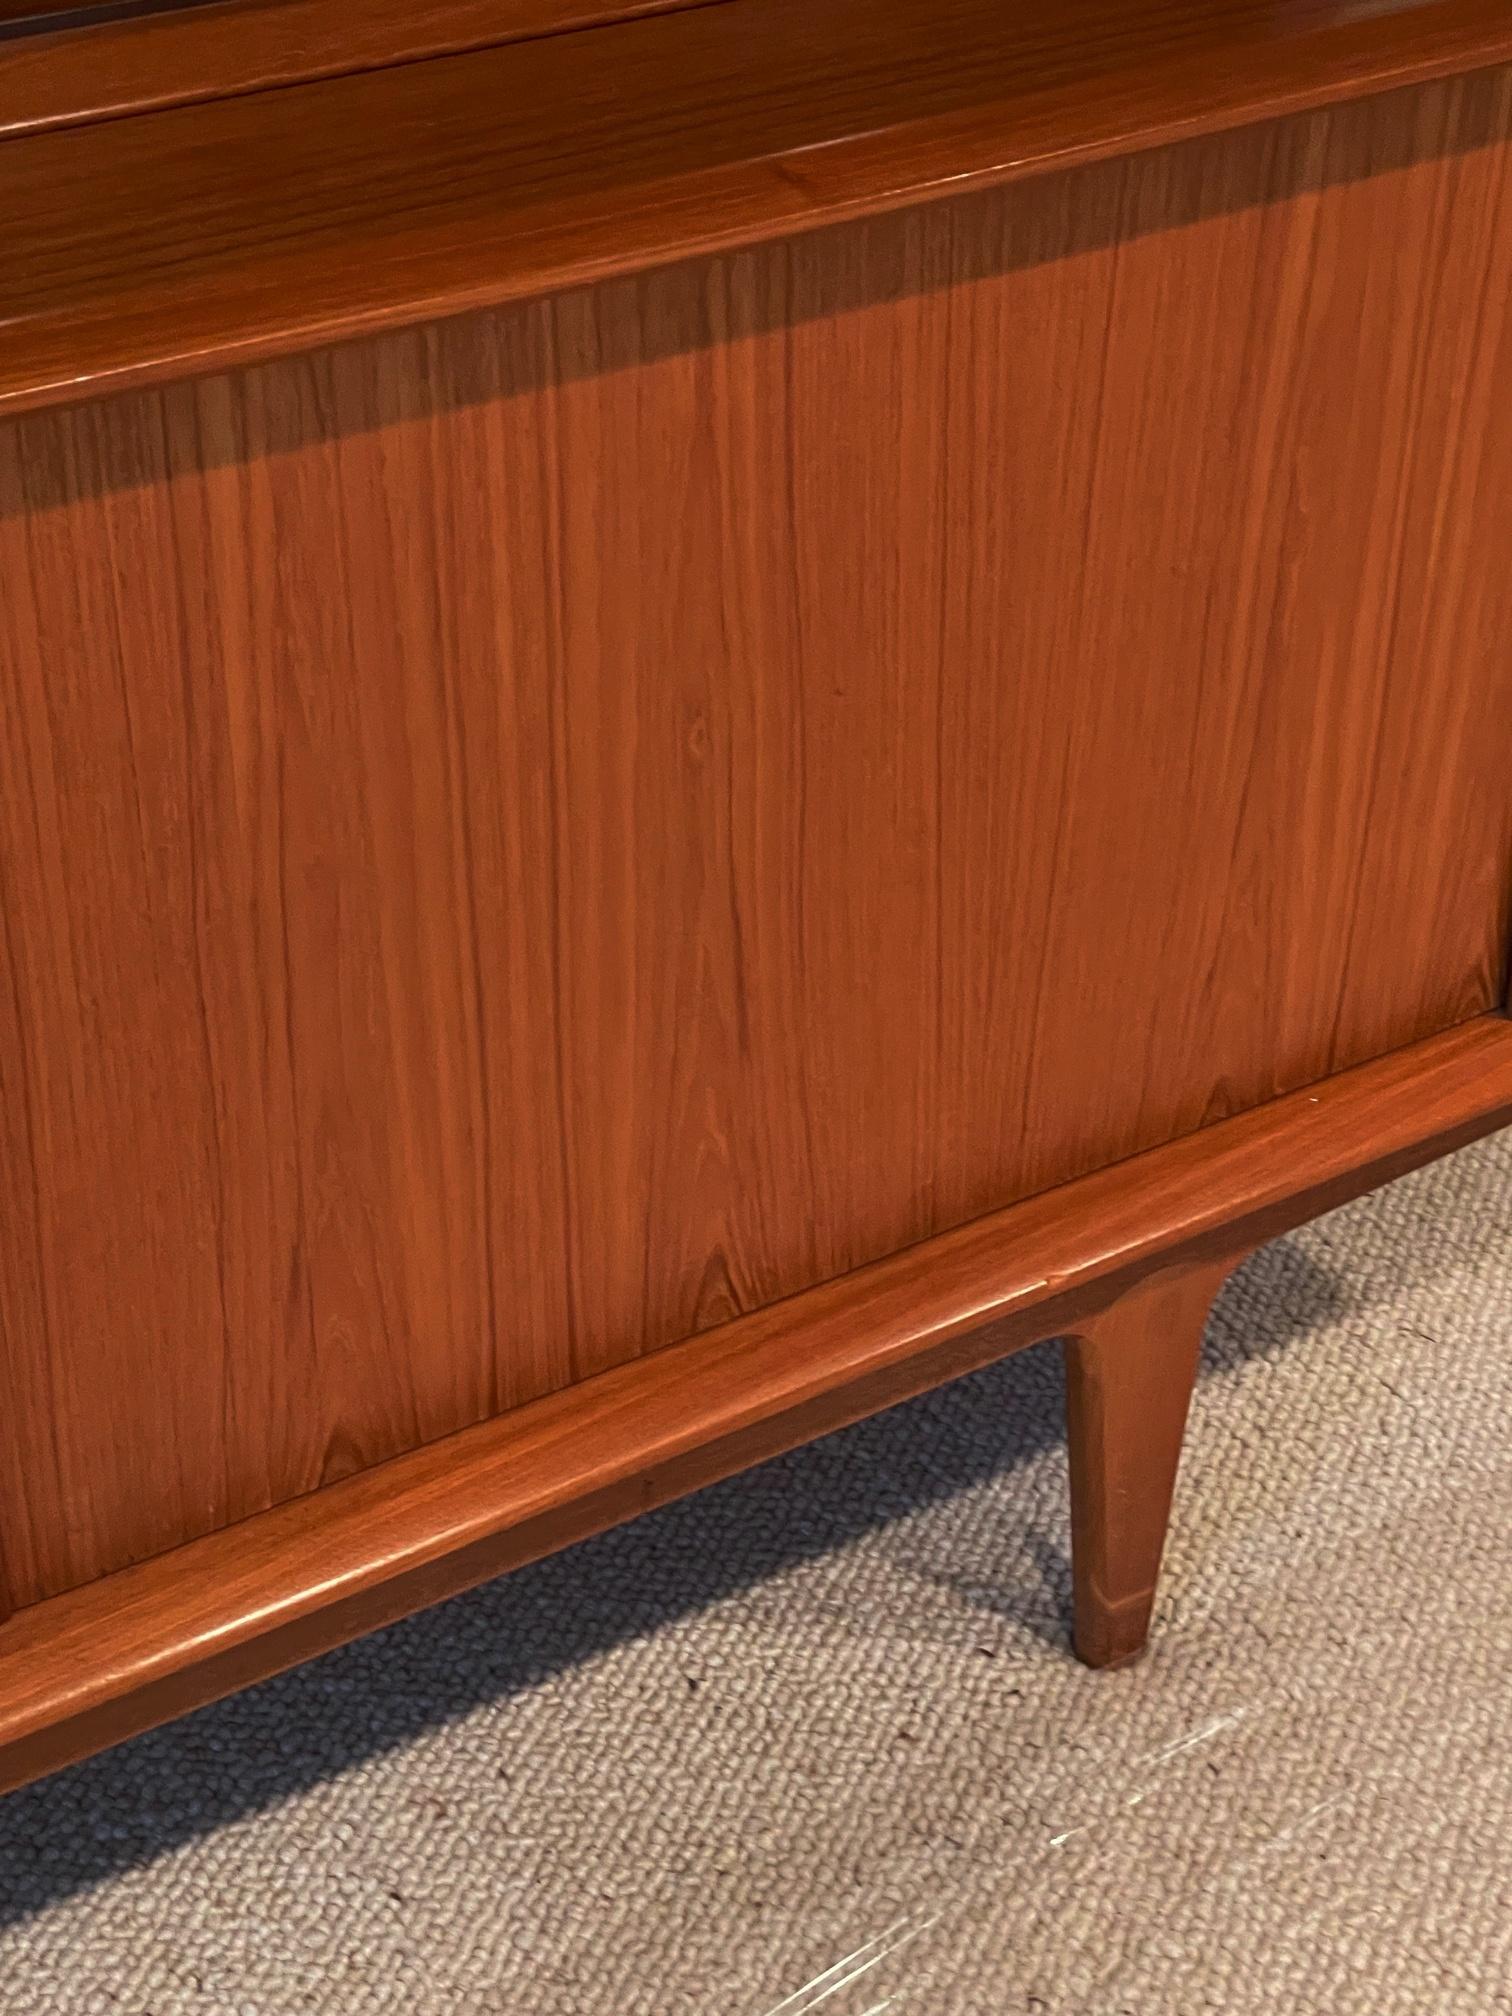 European Modern Founders Furniture Company Danish Teak Credenza With Display For Sale